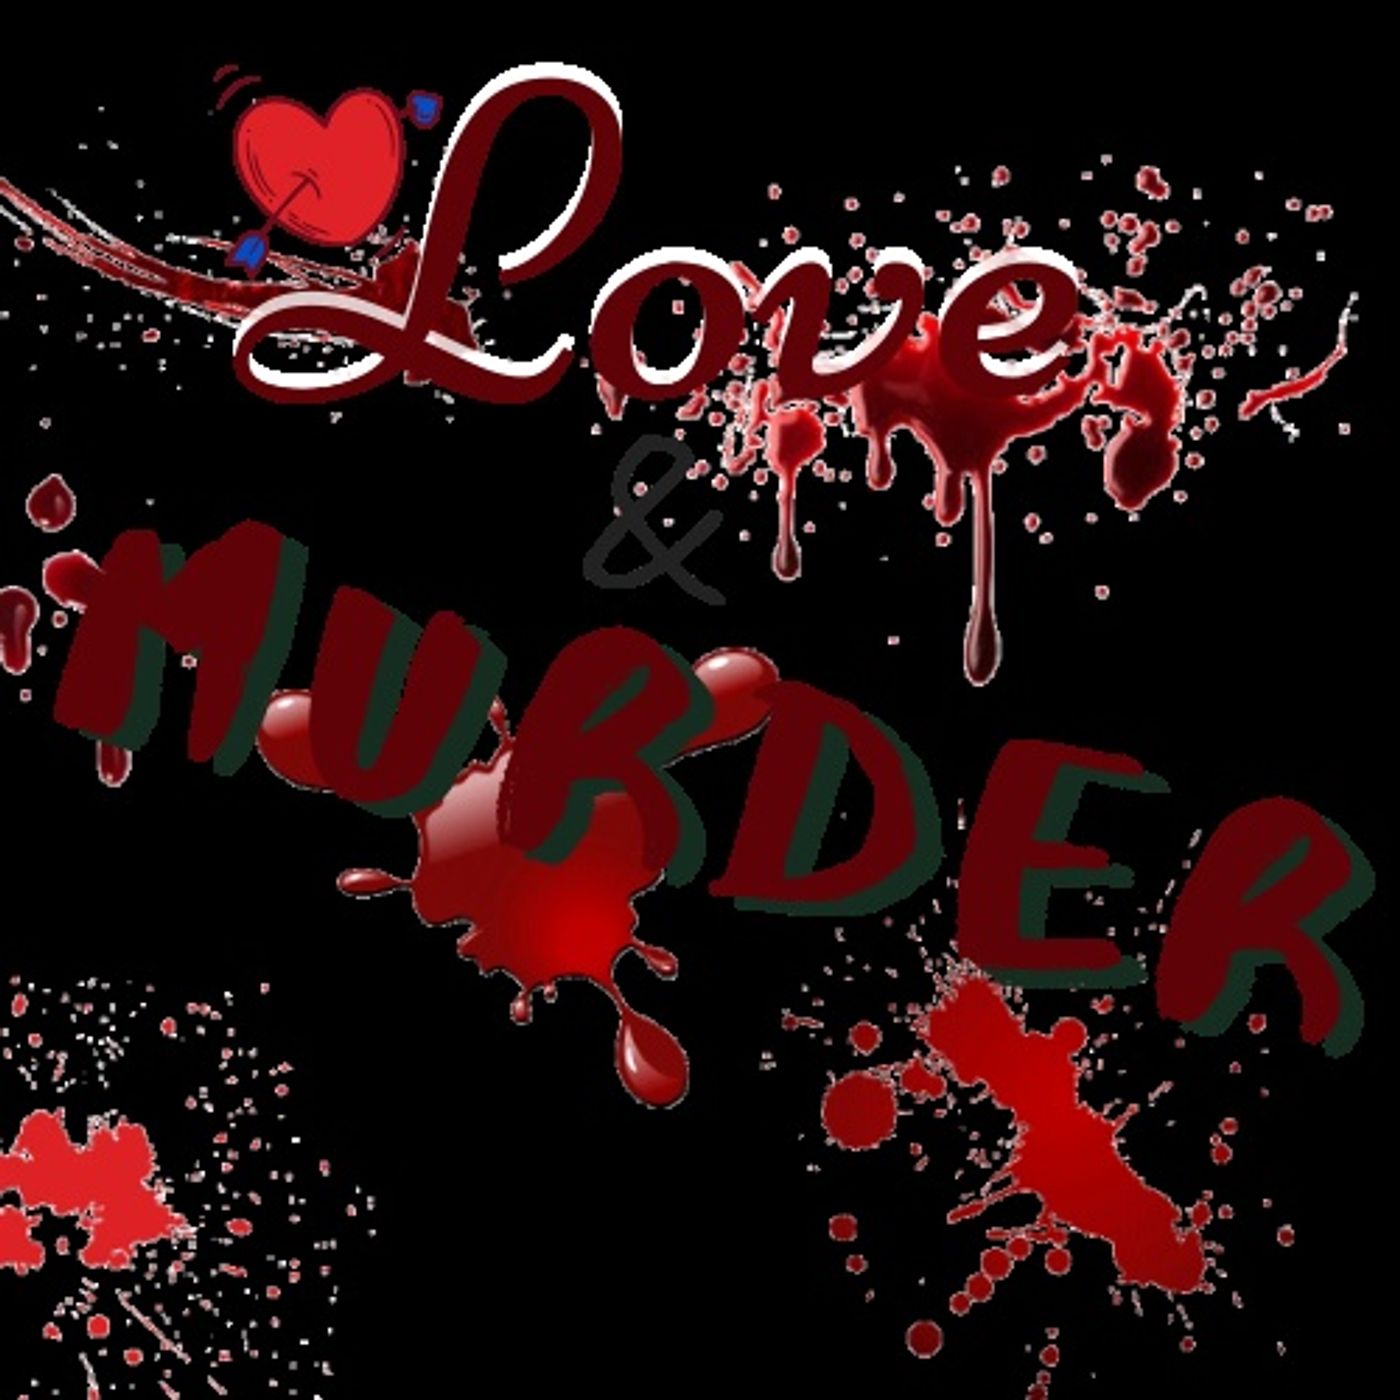 The Olivia Labinjo-Halcrow and Arthur Halcrow Case by Love and Murder